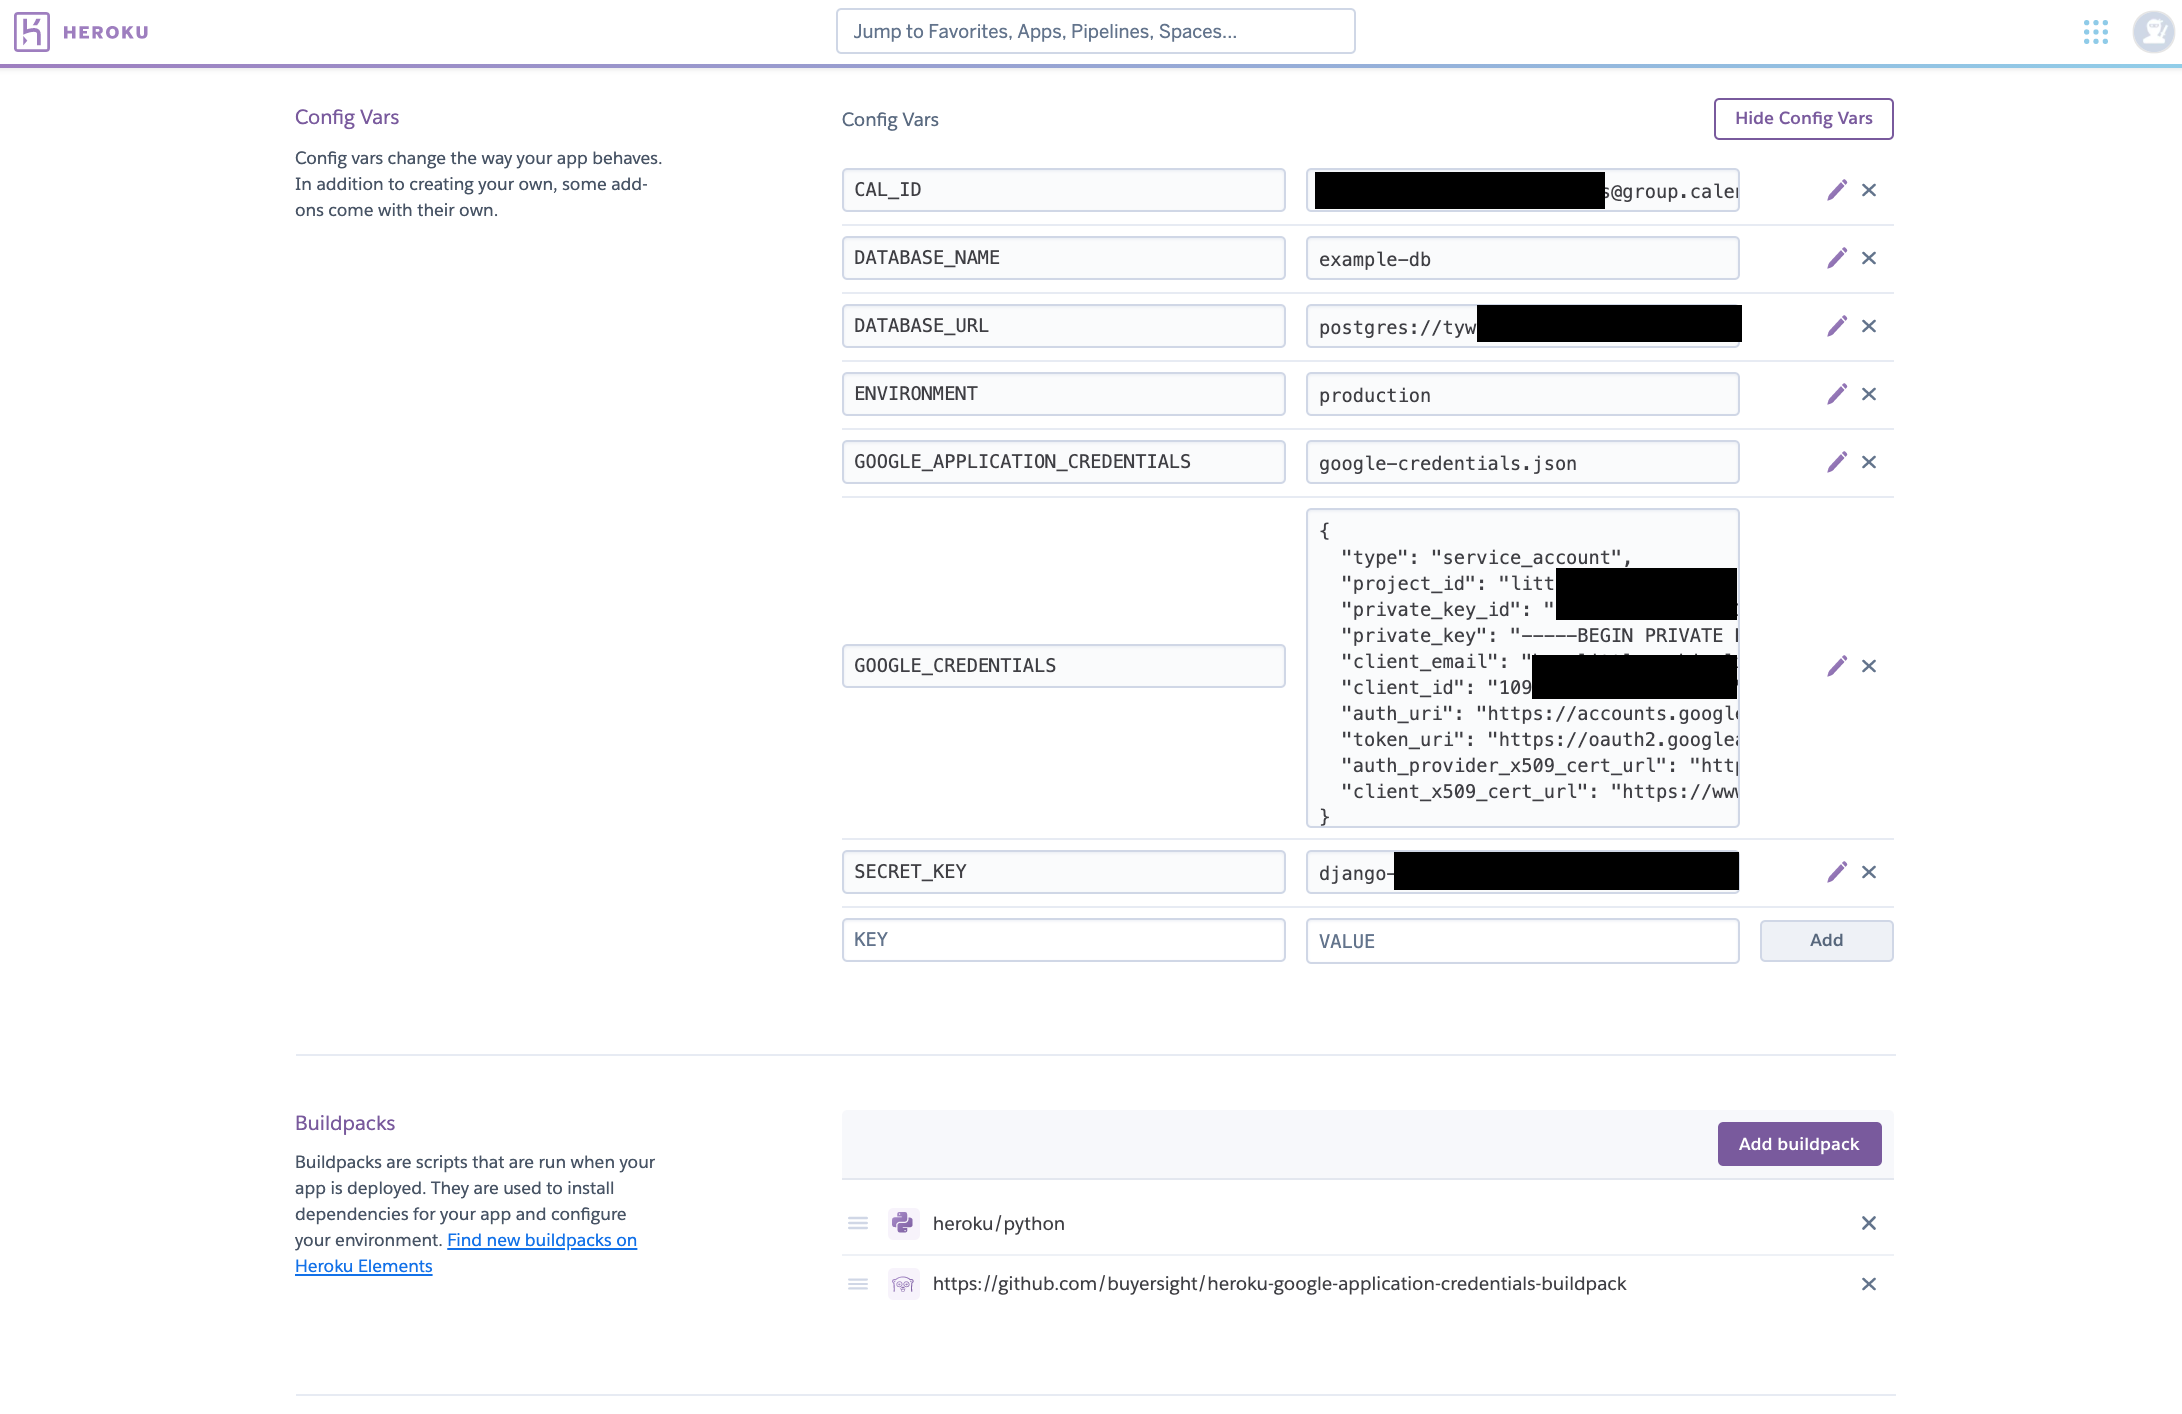 Screenshot showing what Heroku settings pages should look like with custom buildpack and config vars